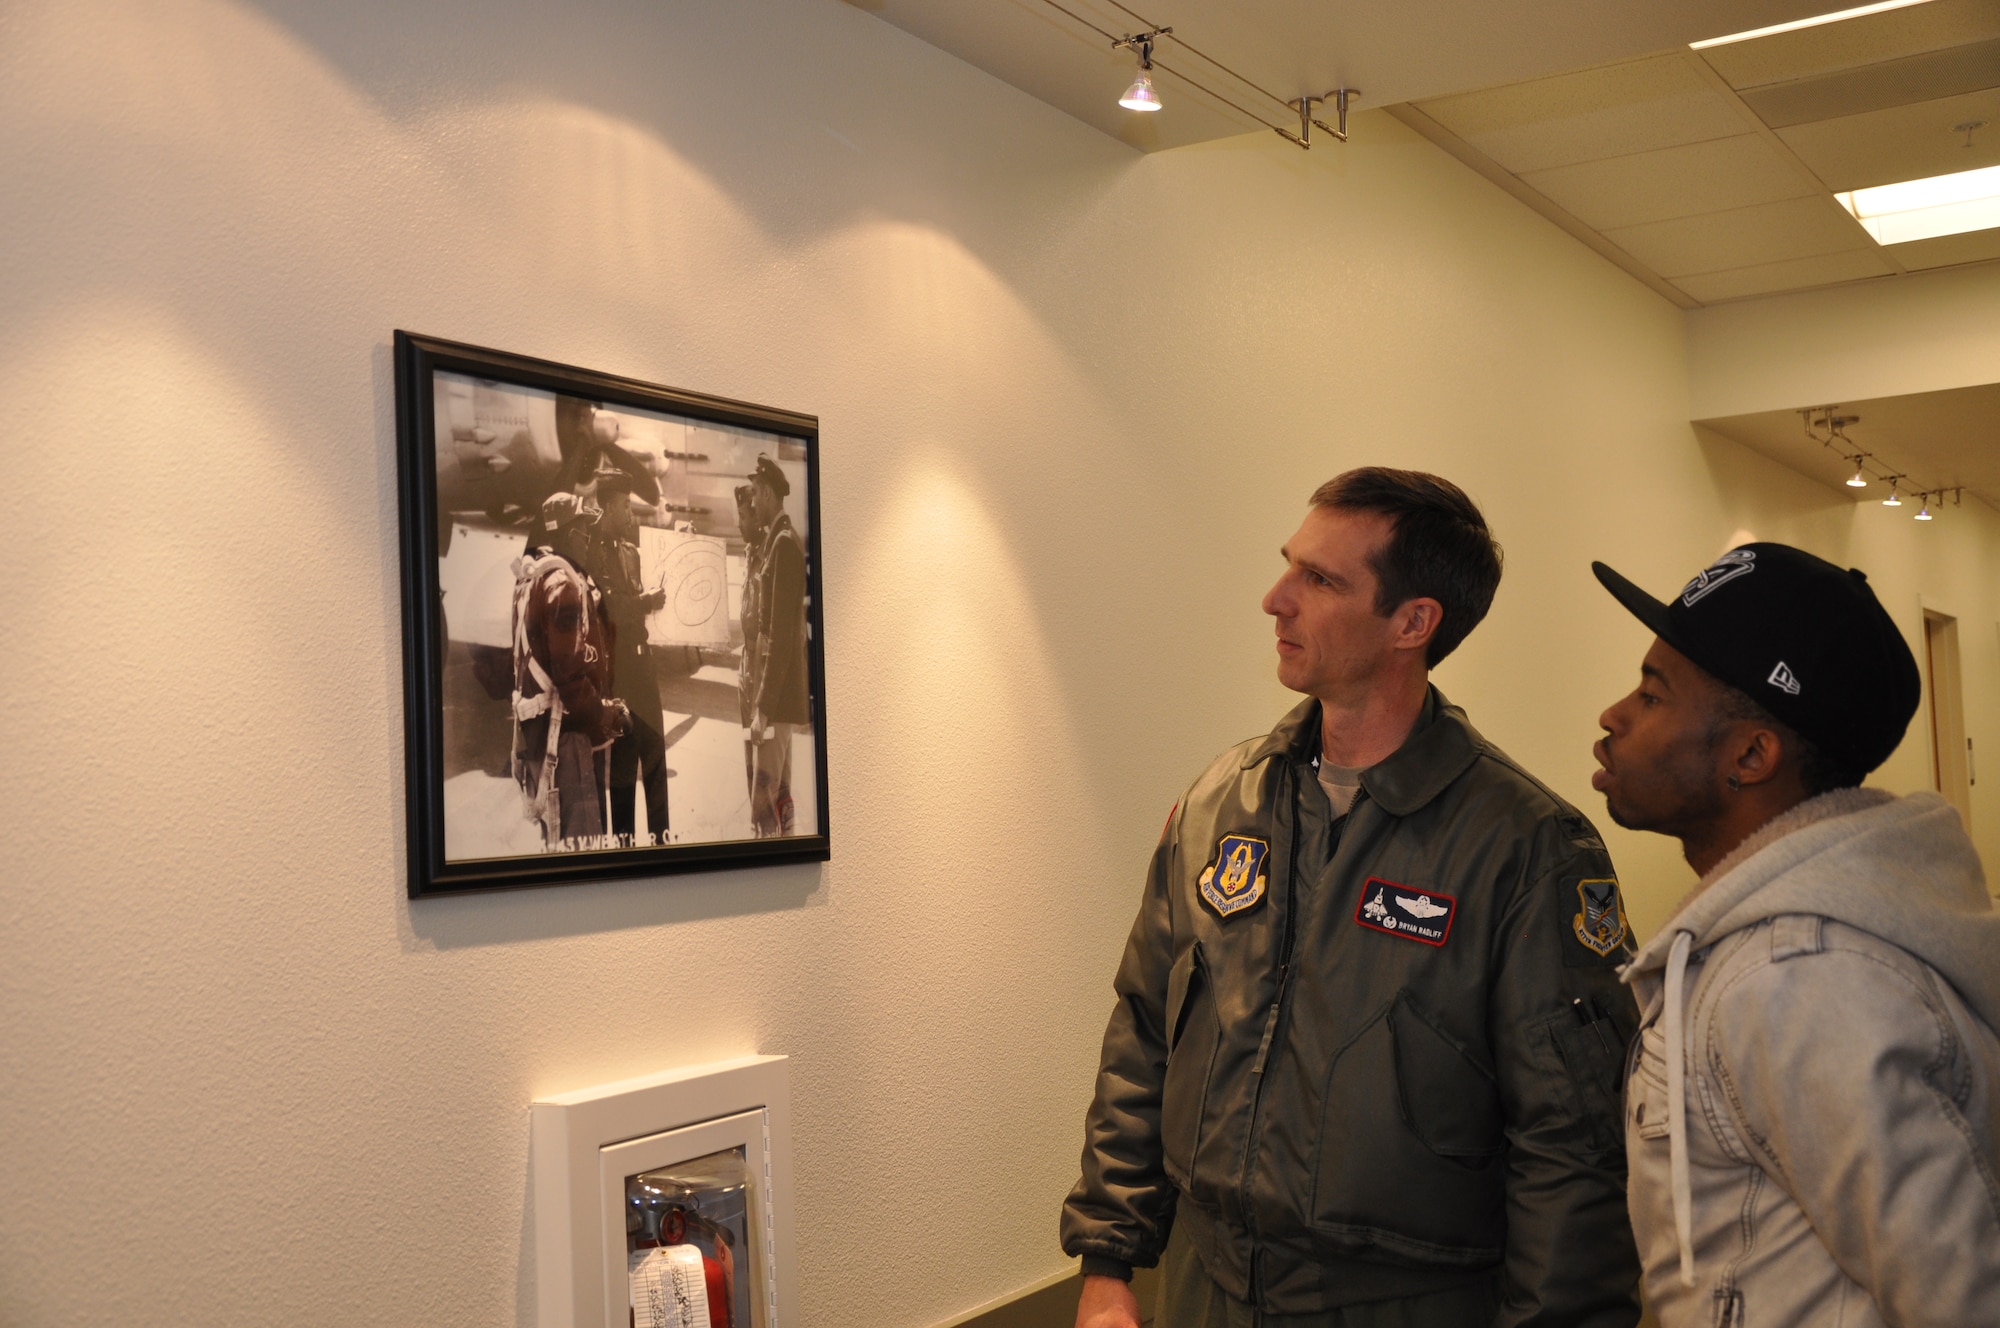 Col. Bryan Radliff, 477th Fighter Group commander, gives a tour of the 477th FG headquarters Tuskegee Airmen memorabilia to actor Marcus Paulk. Paulk plays Deke Watkins in the new George Lucas film, Red Tails, about the Tuskegee Airmen. An advanced screening was held for a small group of Reservists and Anchorage citizens Dec 15. (U. S. Air Force Photo/Capt. Ashley Conner)